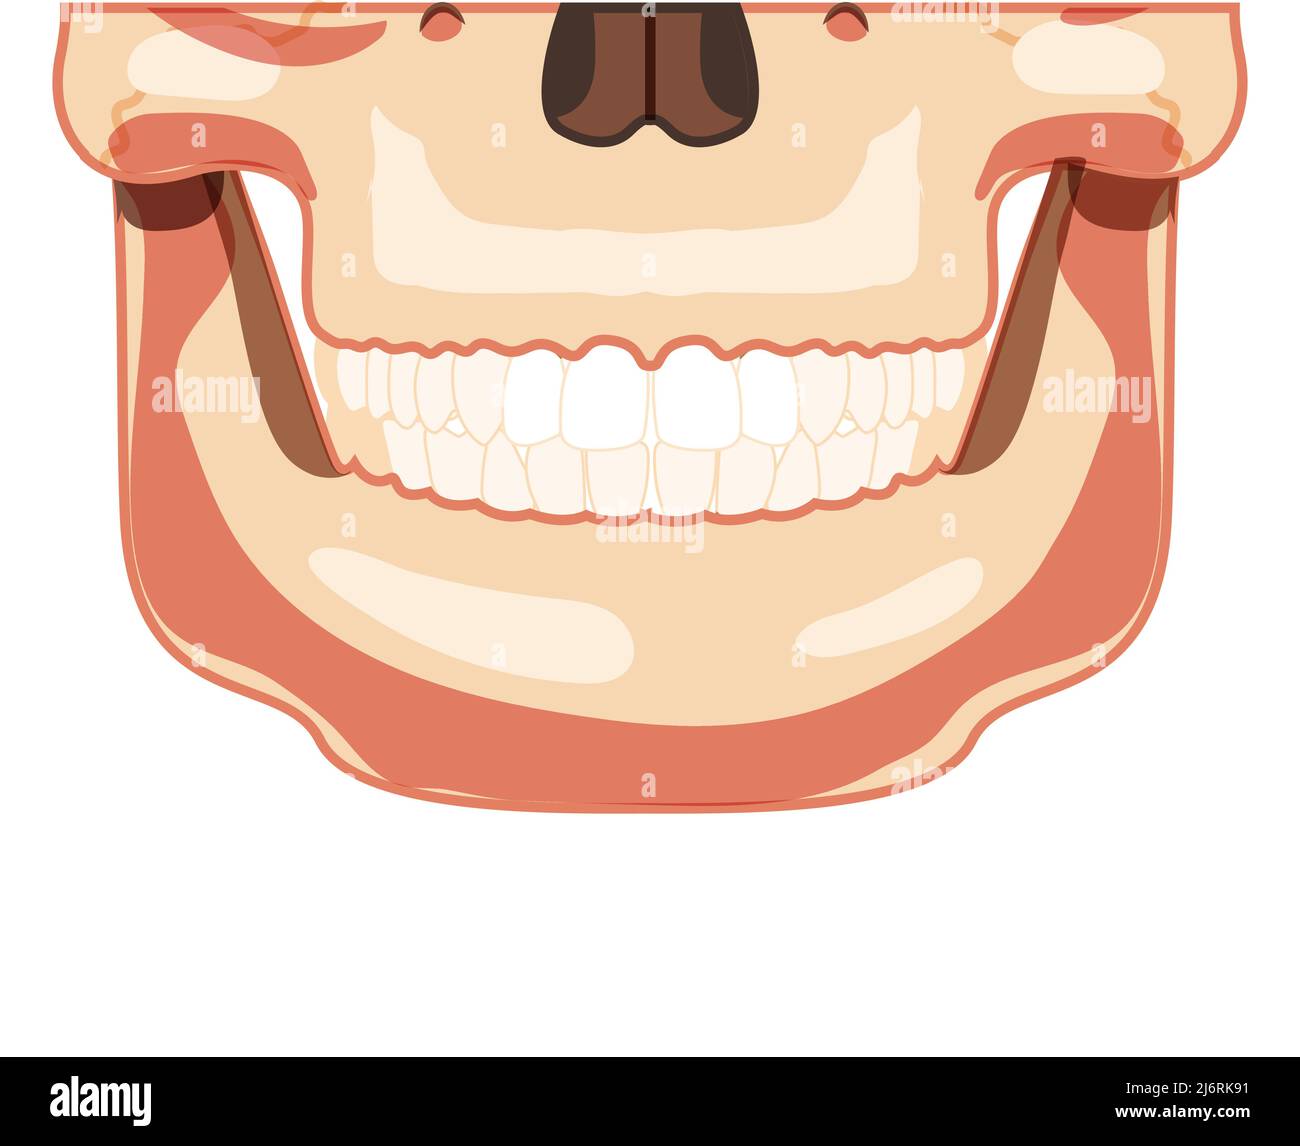 Skull Skeleton Smiley Human head partly front view with teeth row. Human jaws model. Set of chump 3D realistic flat natural color concept Vector illustration of anatomy isolated on white background Stock Vector